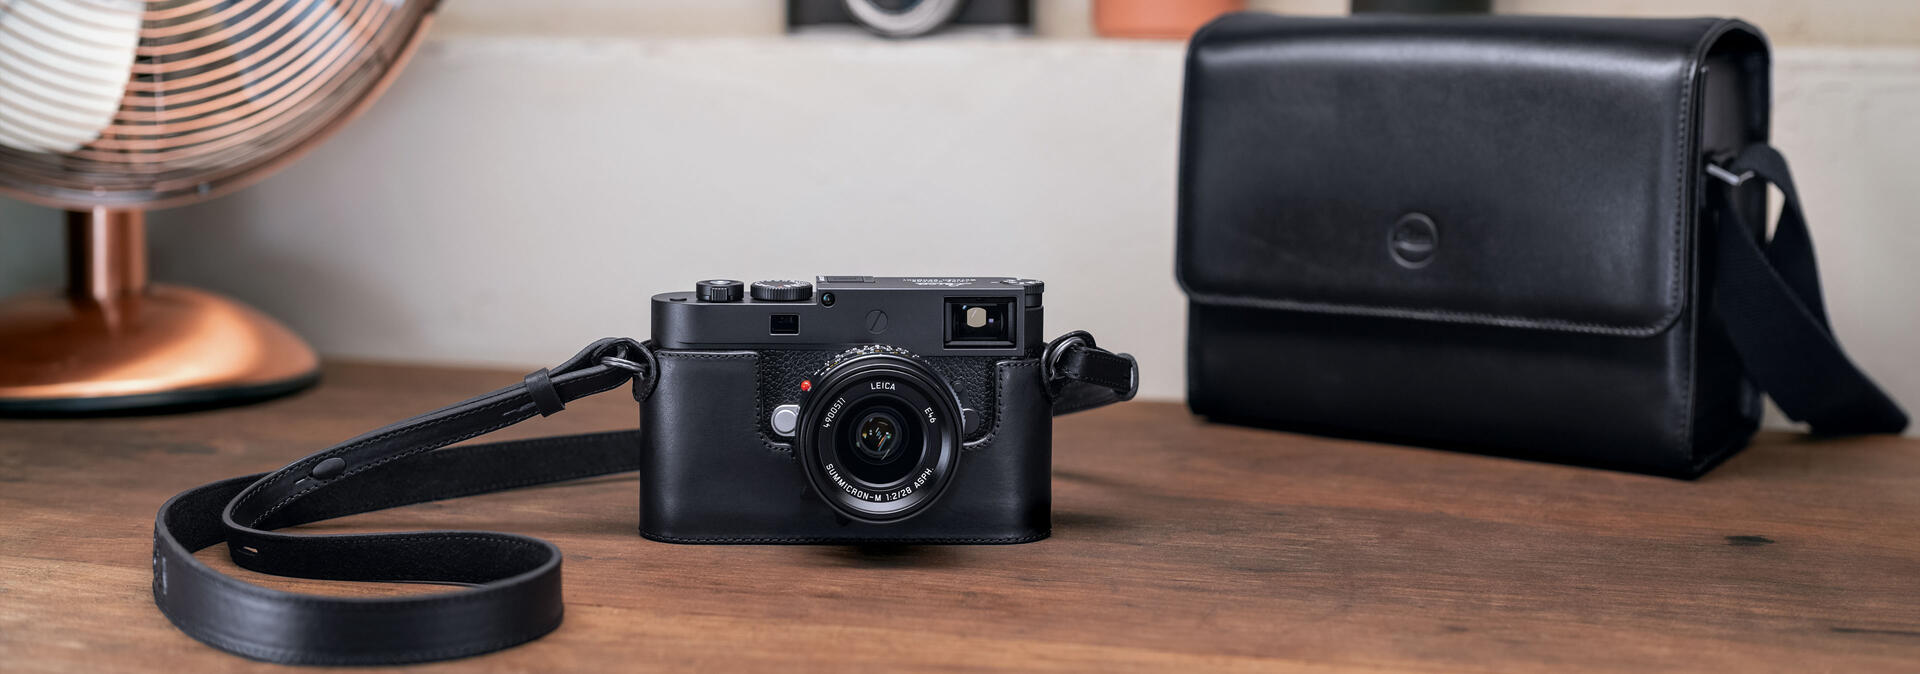 Leica M Camera with asseccories